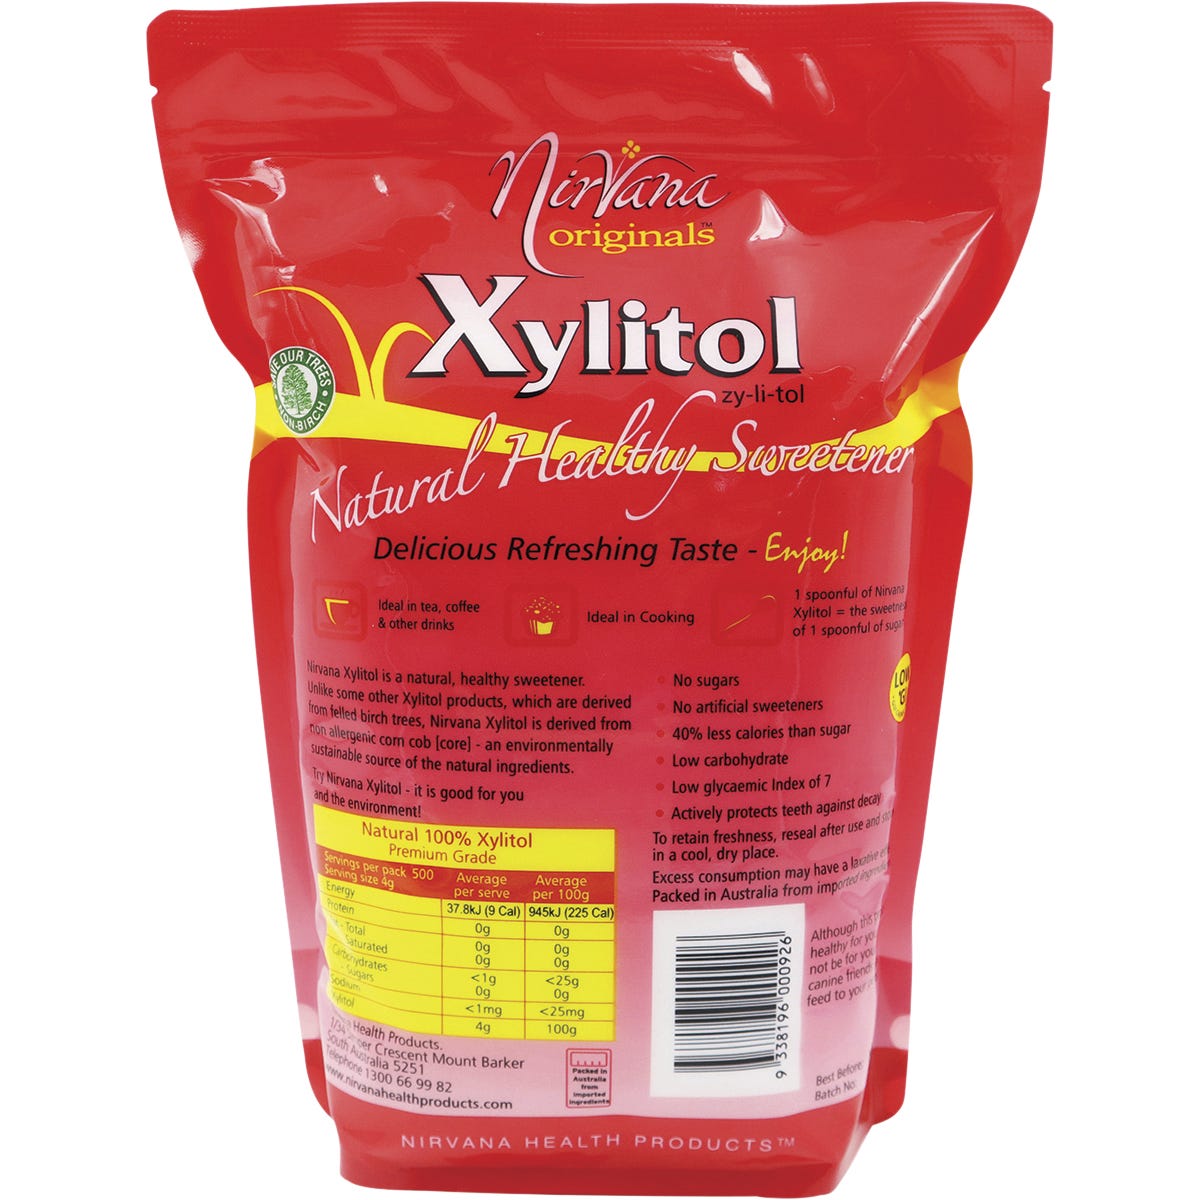 Nirvana Originals Xylitol 2kg - Dr Earth - Sweeteners